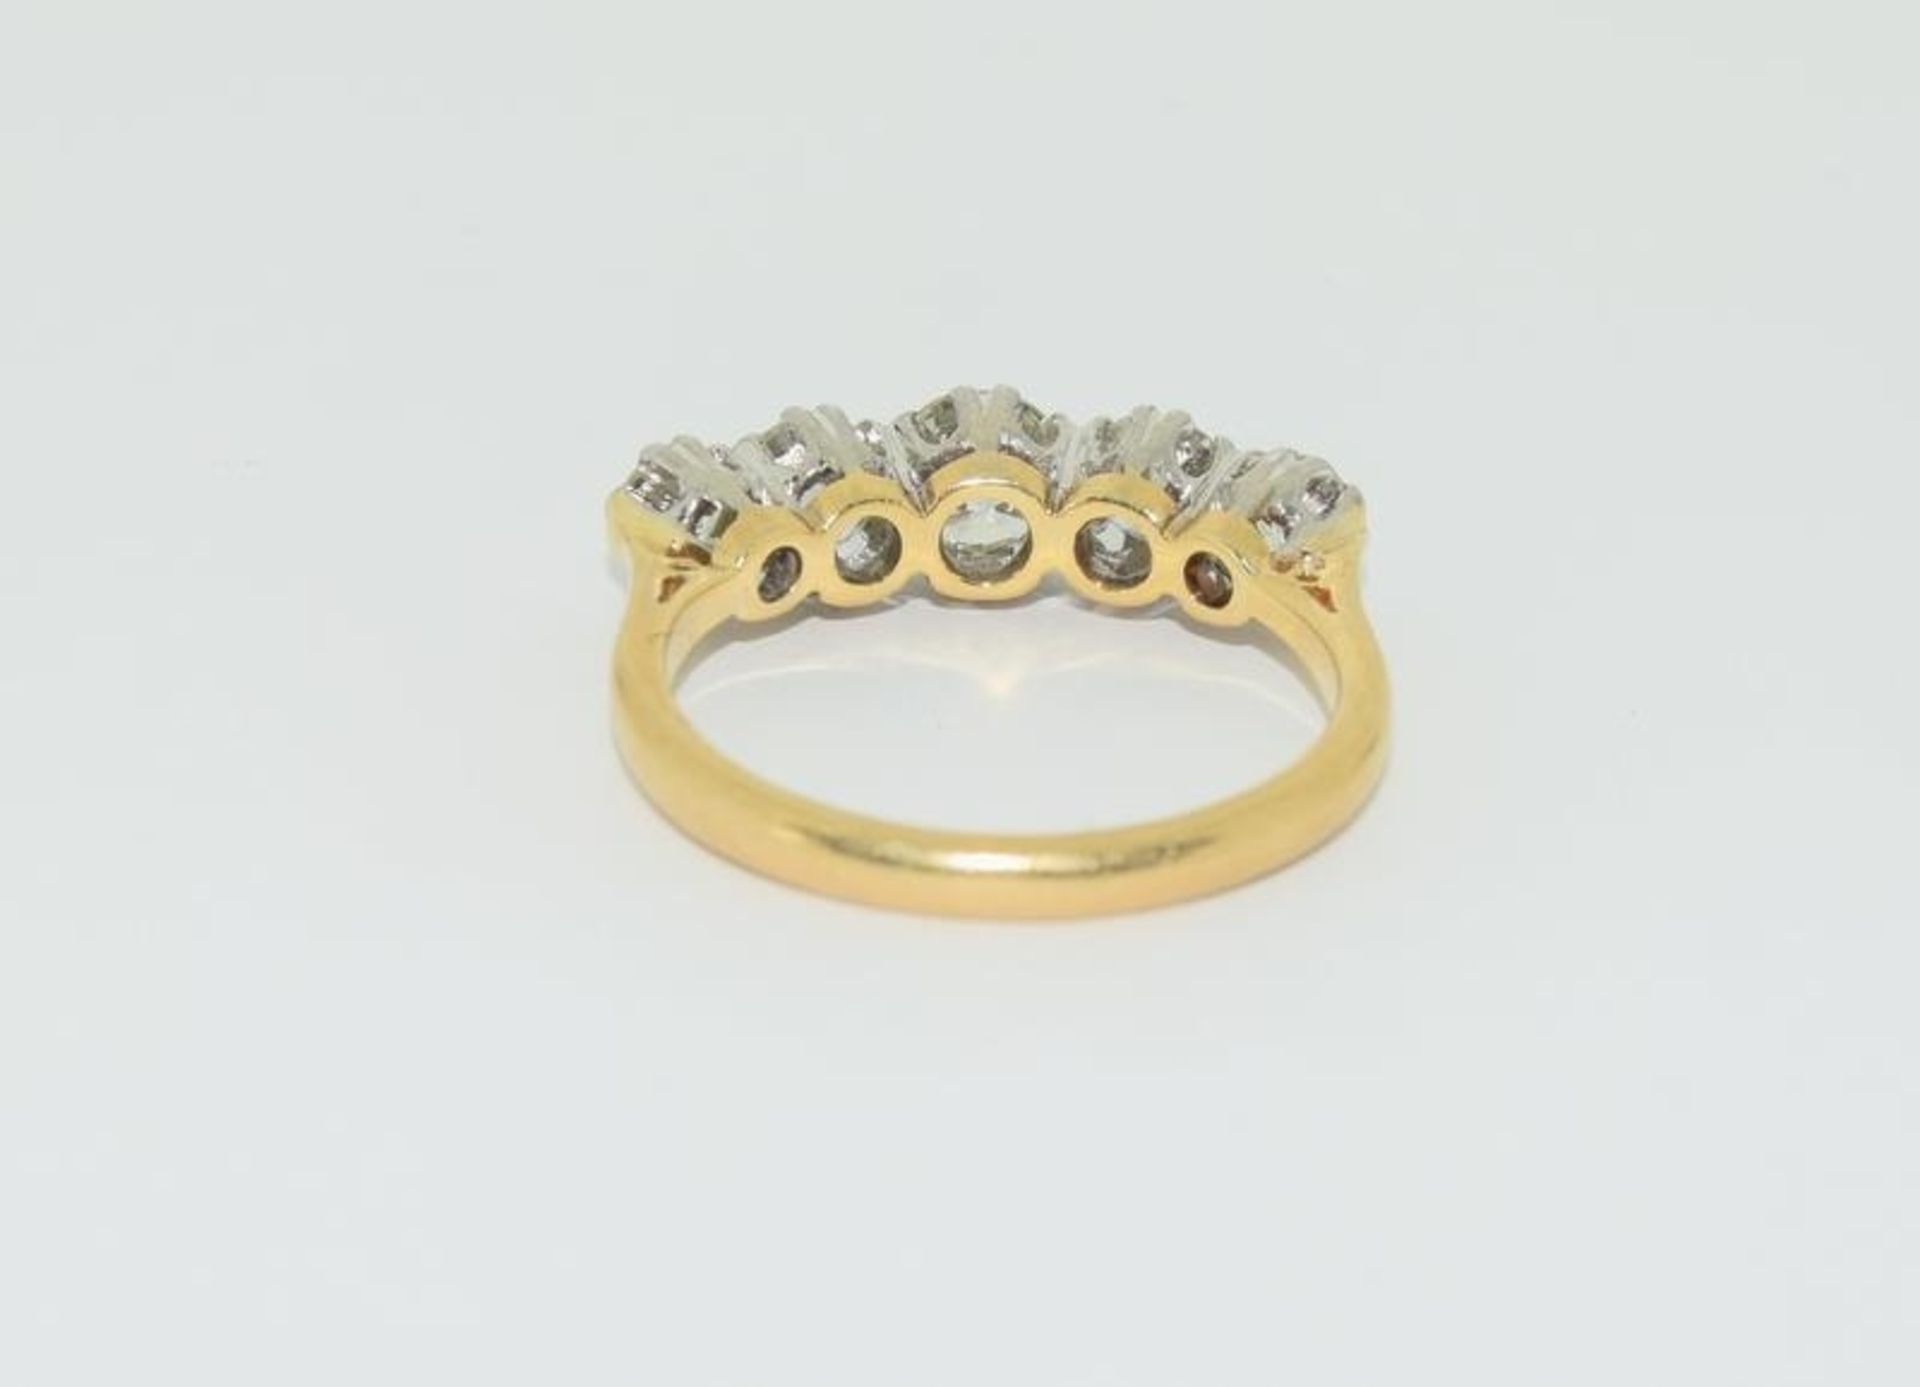 18ct gold and platinum 5 stone diamond ring hallmarked in ring as 1.39ct diamond value size N - Image 3 of 5